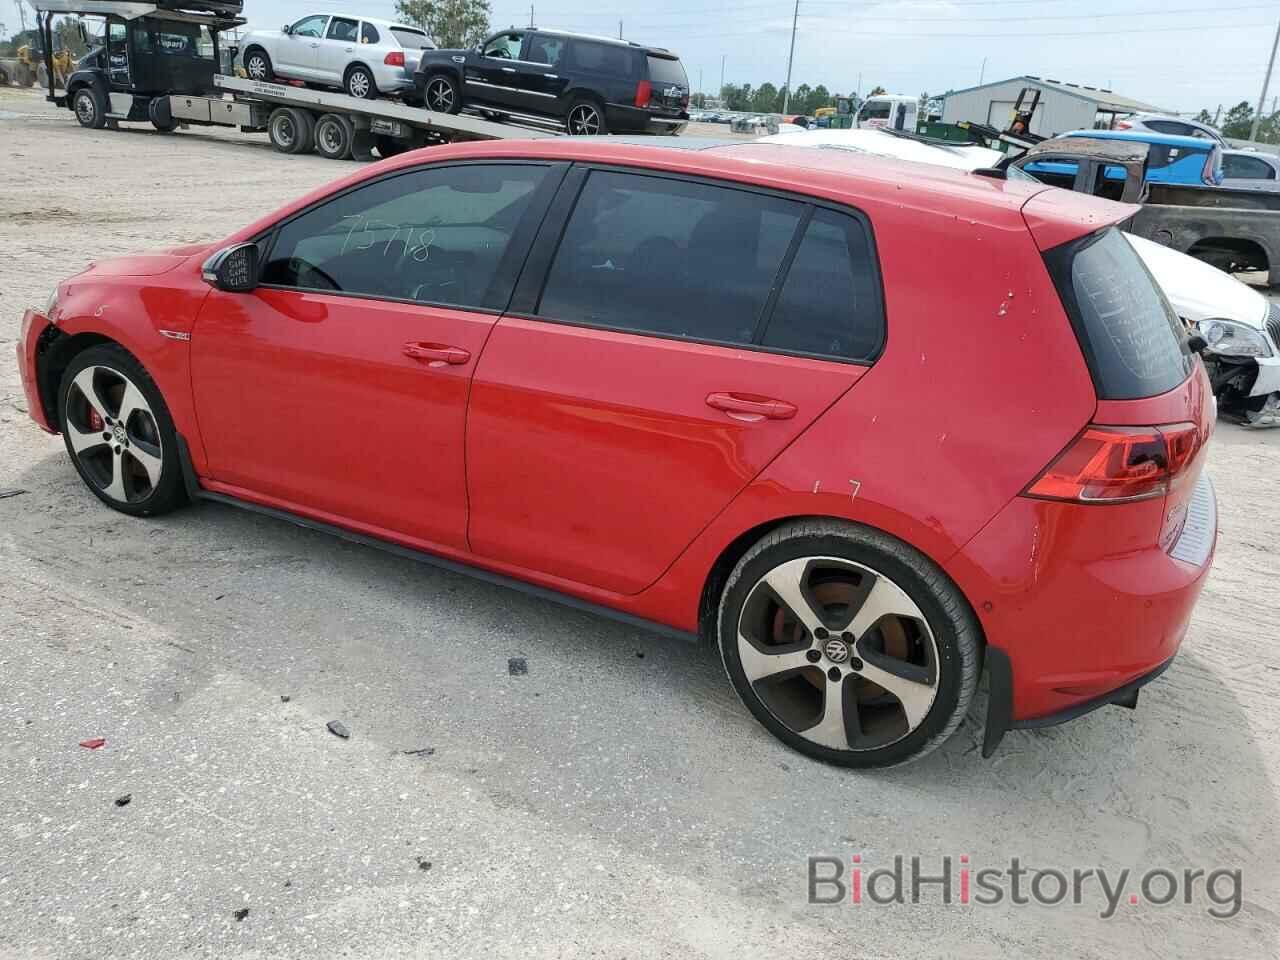 Report 3VW547AU5HM056882 VOLKSWAGEN GTI 2017 RED GAS - price and damage ...